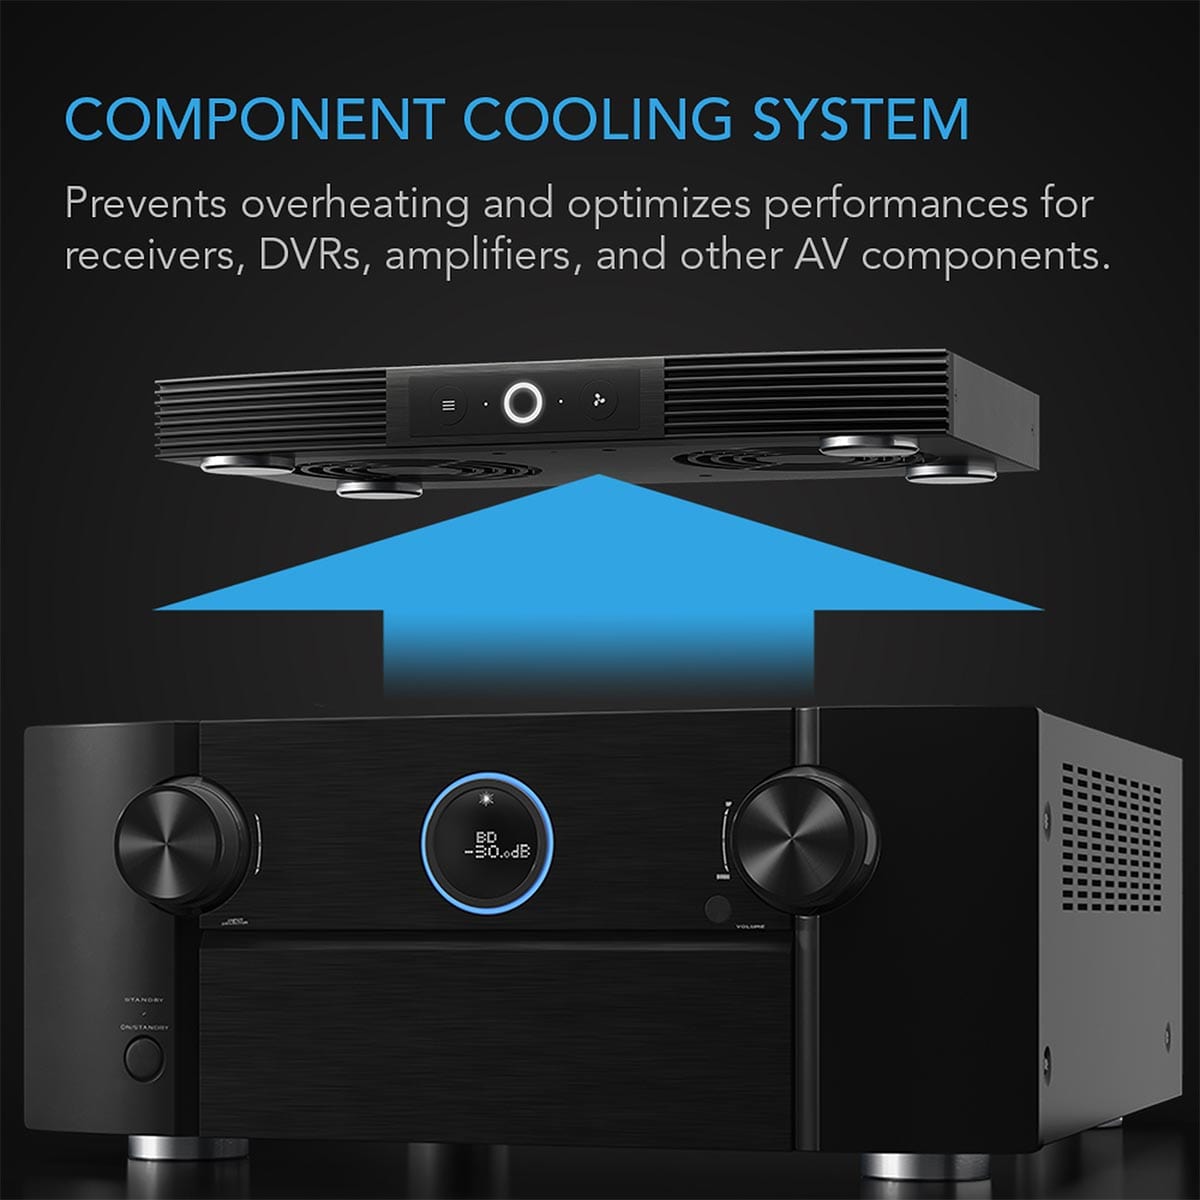 AC Infinity AC Infinity AIRCOM S6 AV Component Cooling System - Rear Exhaust Component Cooling